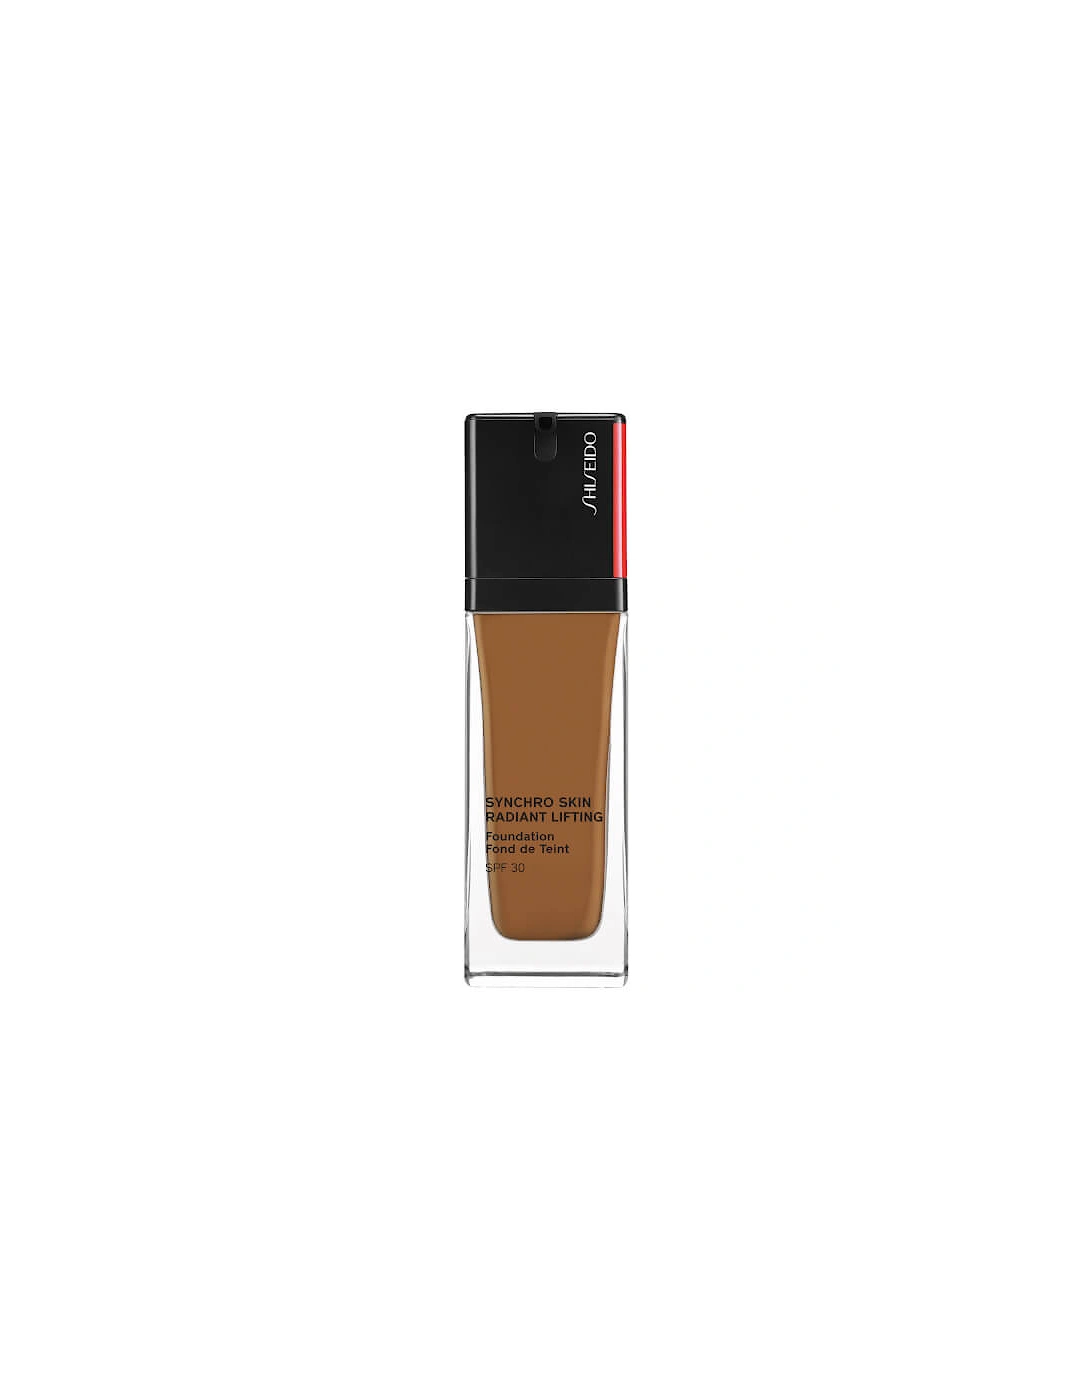 Synchro Skin Radiant Lifting SPF30 Foundation - 510 Suede, 2 of 1